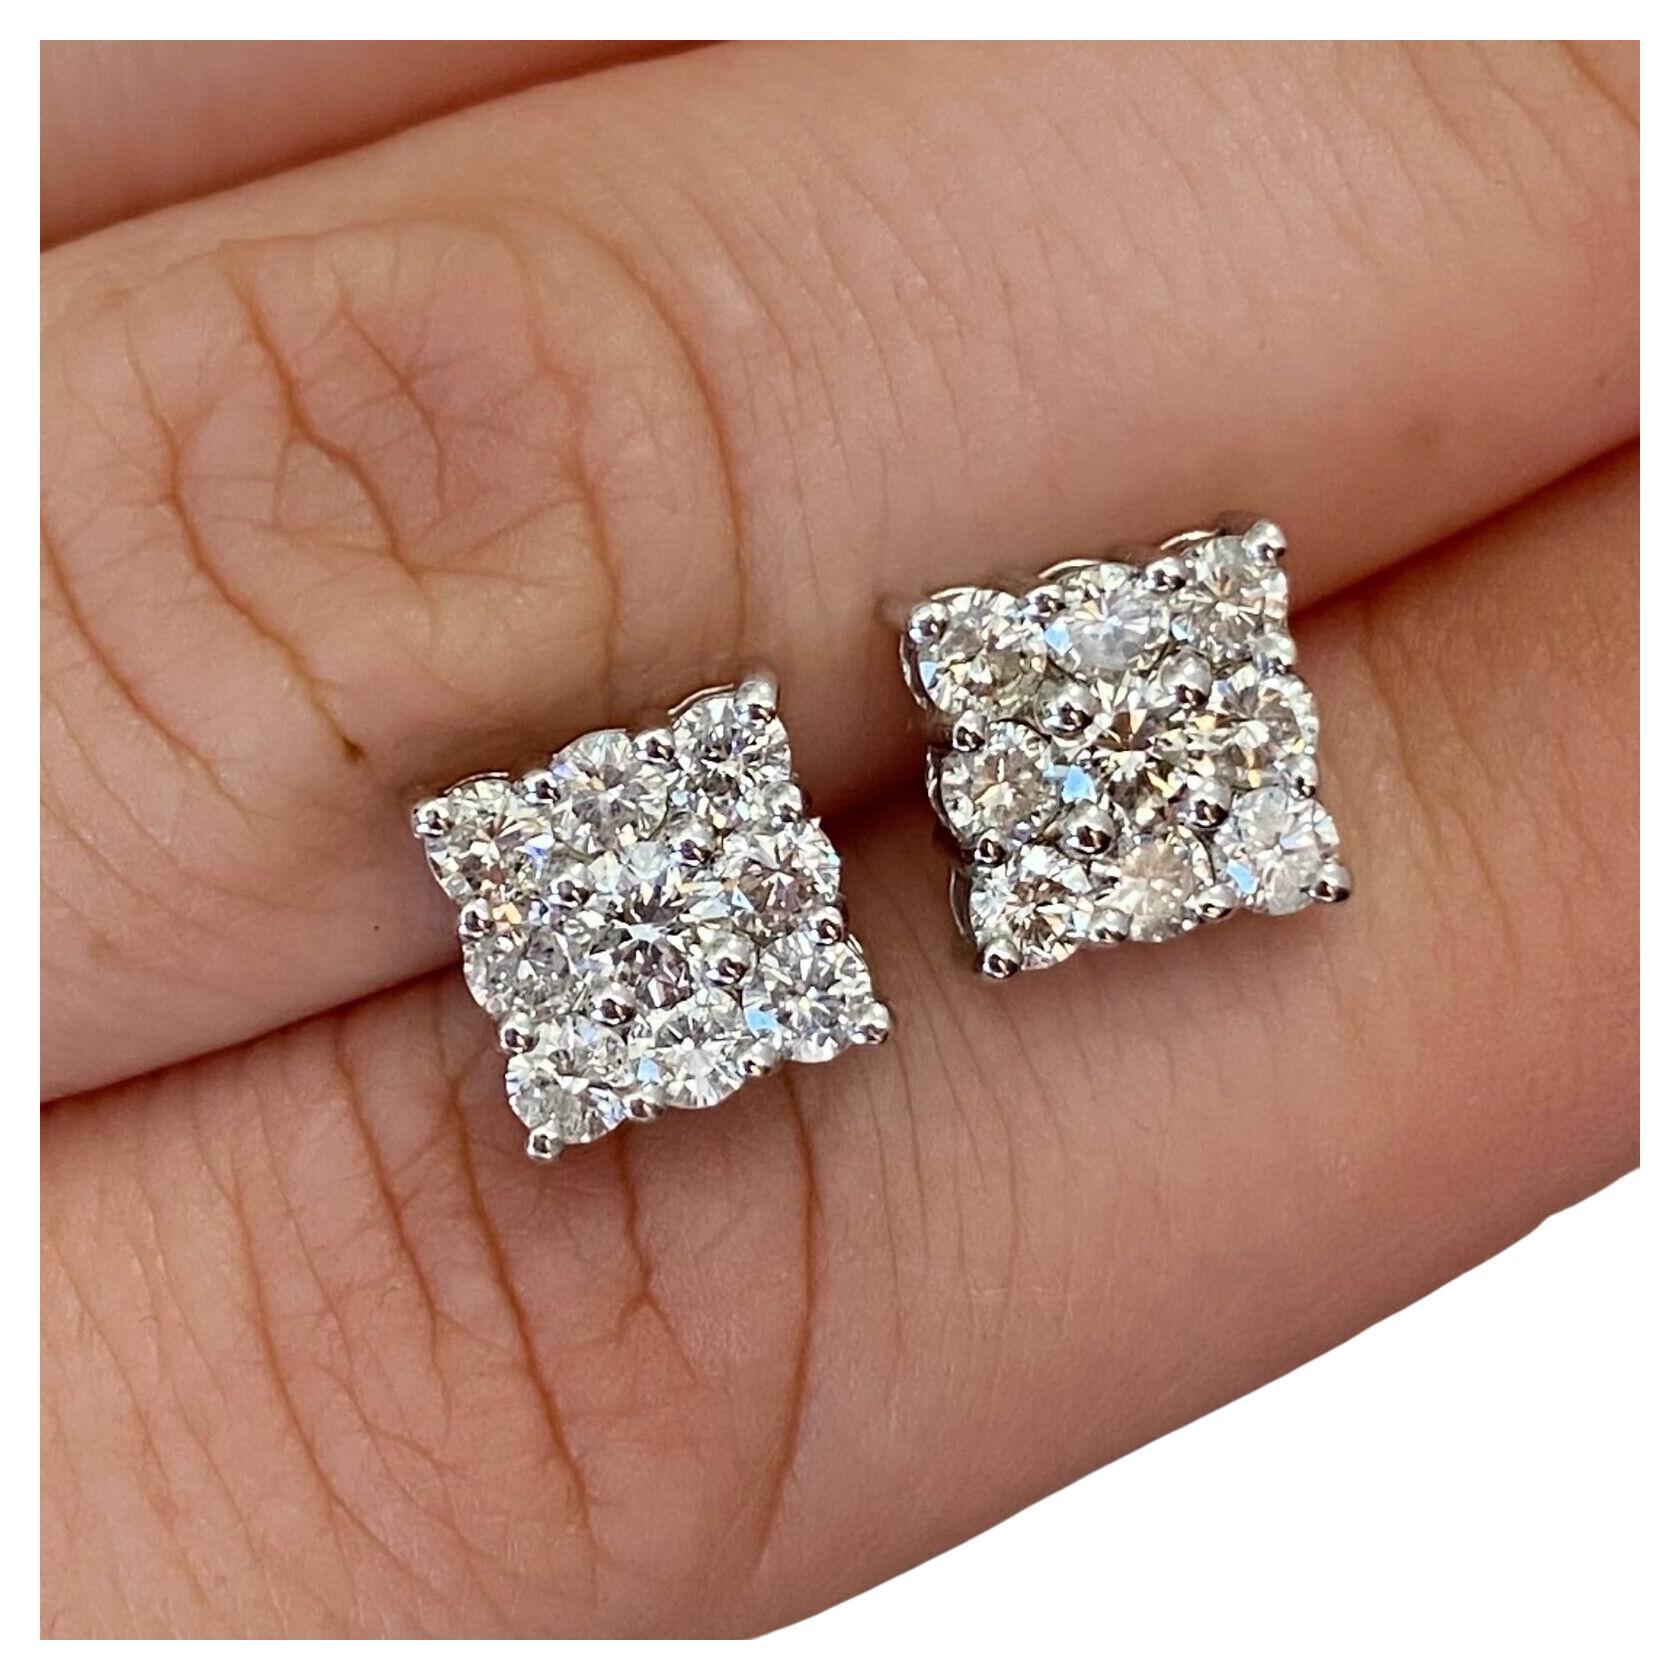 Sparkling Natural Diamond Earrings Sieraden Oorbellen Oorknopjes Baguette and Round Brilliant Cut Stones Diamond Stud Earrings Solid 14K White Gold Gifts for Her 